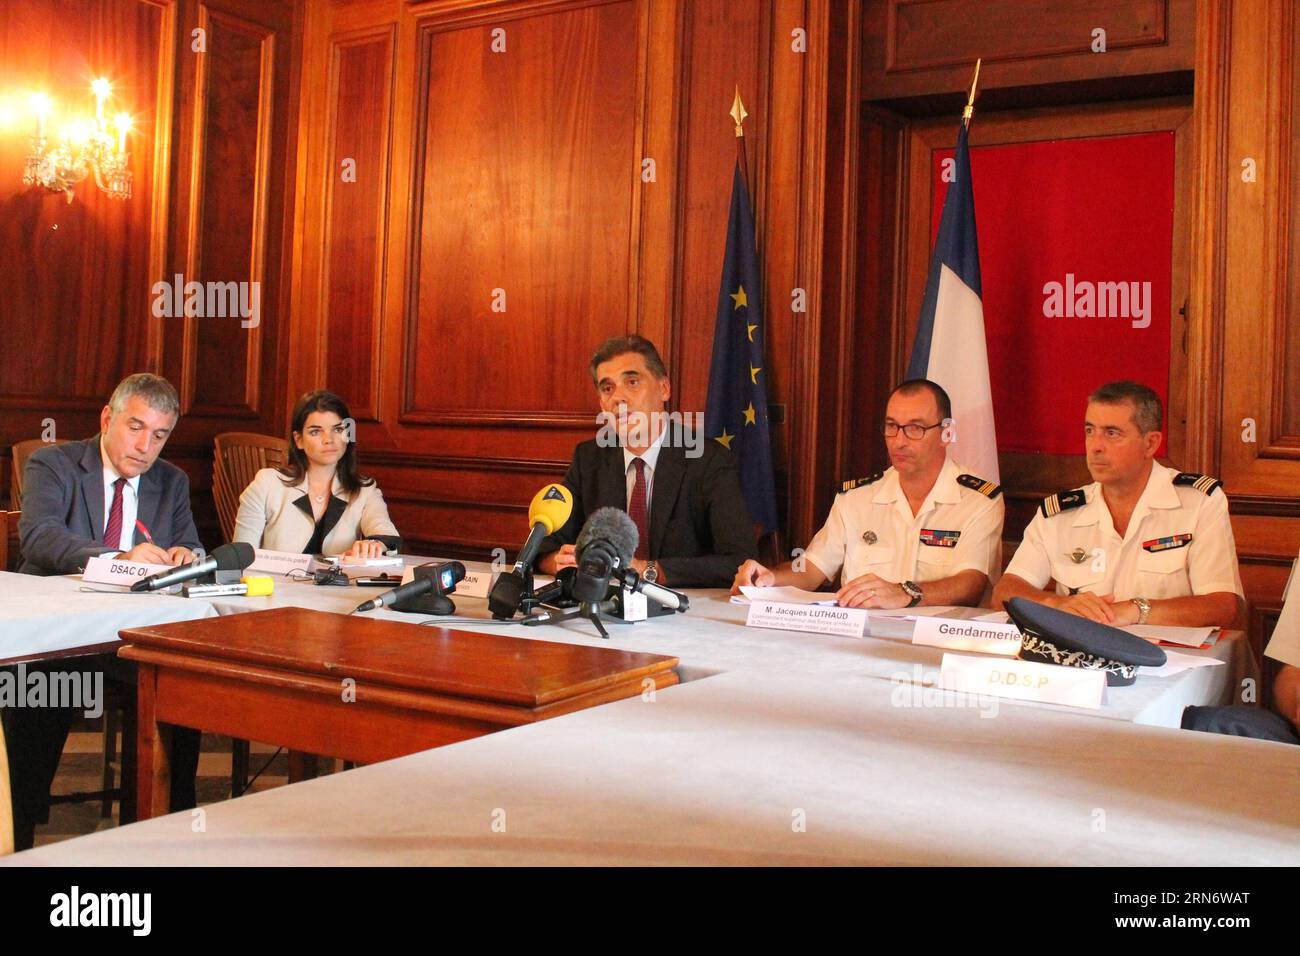 (150807) -- LA REUNION, Aug. 7, 2015 -- Dominique Sorain (C), La Reunion s administrator, talks to media during a press conference on search plan for MH370 debris in Reunion Island, on Aug. 7, 2015. Authority of France s oversea island La Reunion has confirmed the plan of search for more MH370 parts and said the search will last for at least one week. )(azp) LA REUNION-PRESS CONFERENCE-MH370 ROMAINxLATOURNERIE PUBLICATIONxNOTxINxCHN   150807 La Reunion Aug 7 2015 Dominique  C La Reunion S Administrator Talks to Media during a Press Conference ON Search Plan for MH370 debris in Reunion Iceland Stock Photo